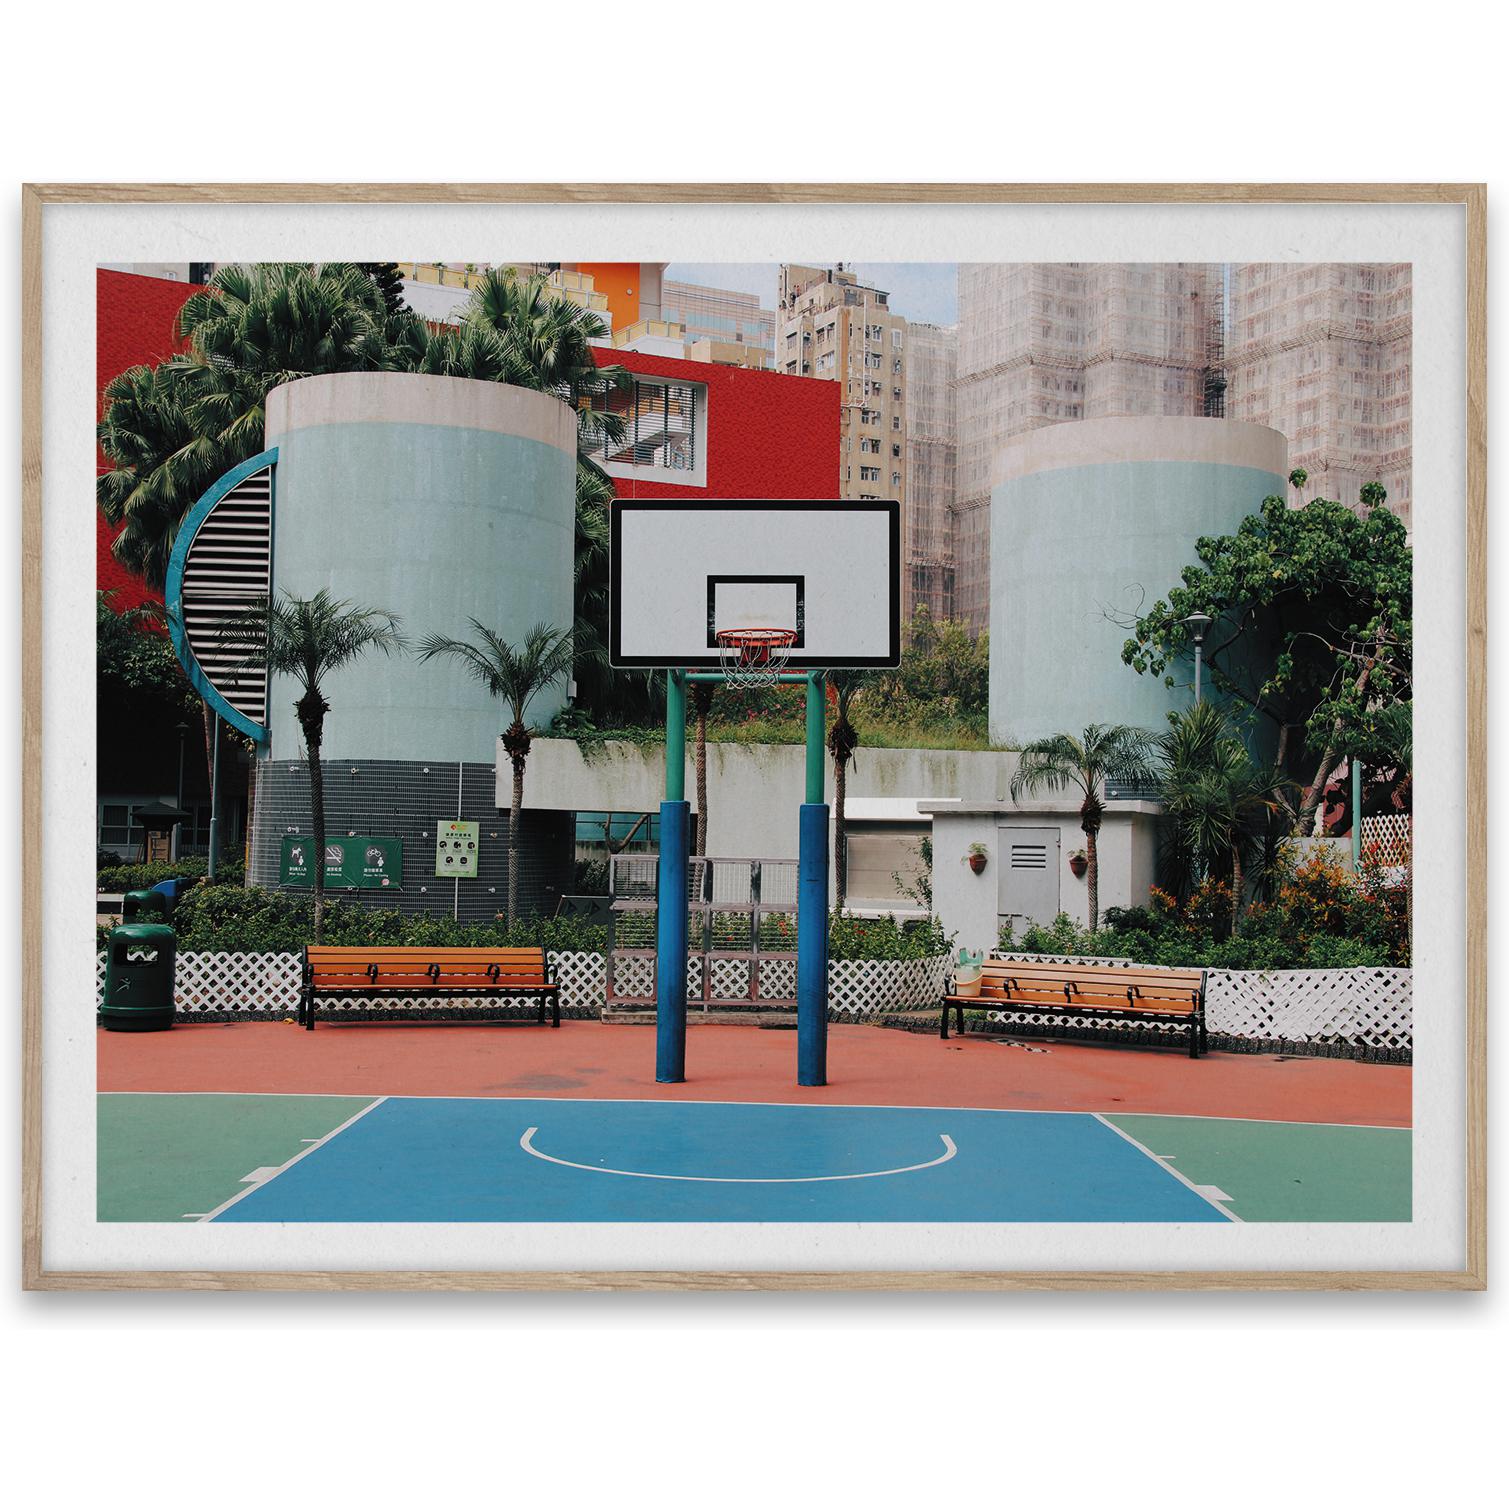 Paper Collective Cities of Basketball 04, Hong Kong Affiche, 30x40 cm